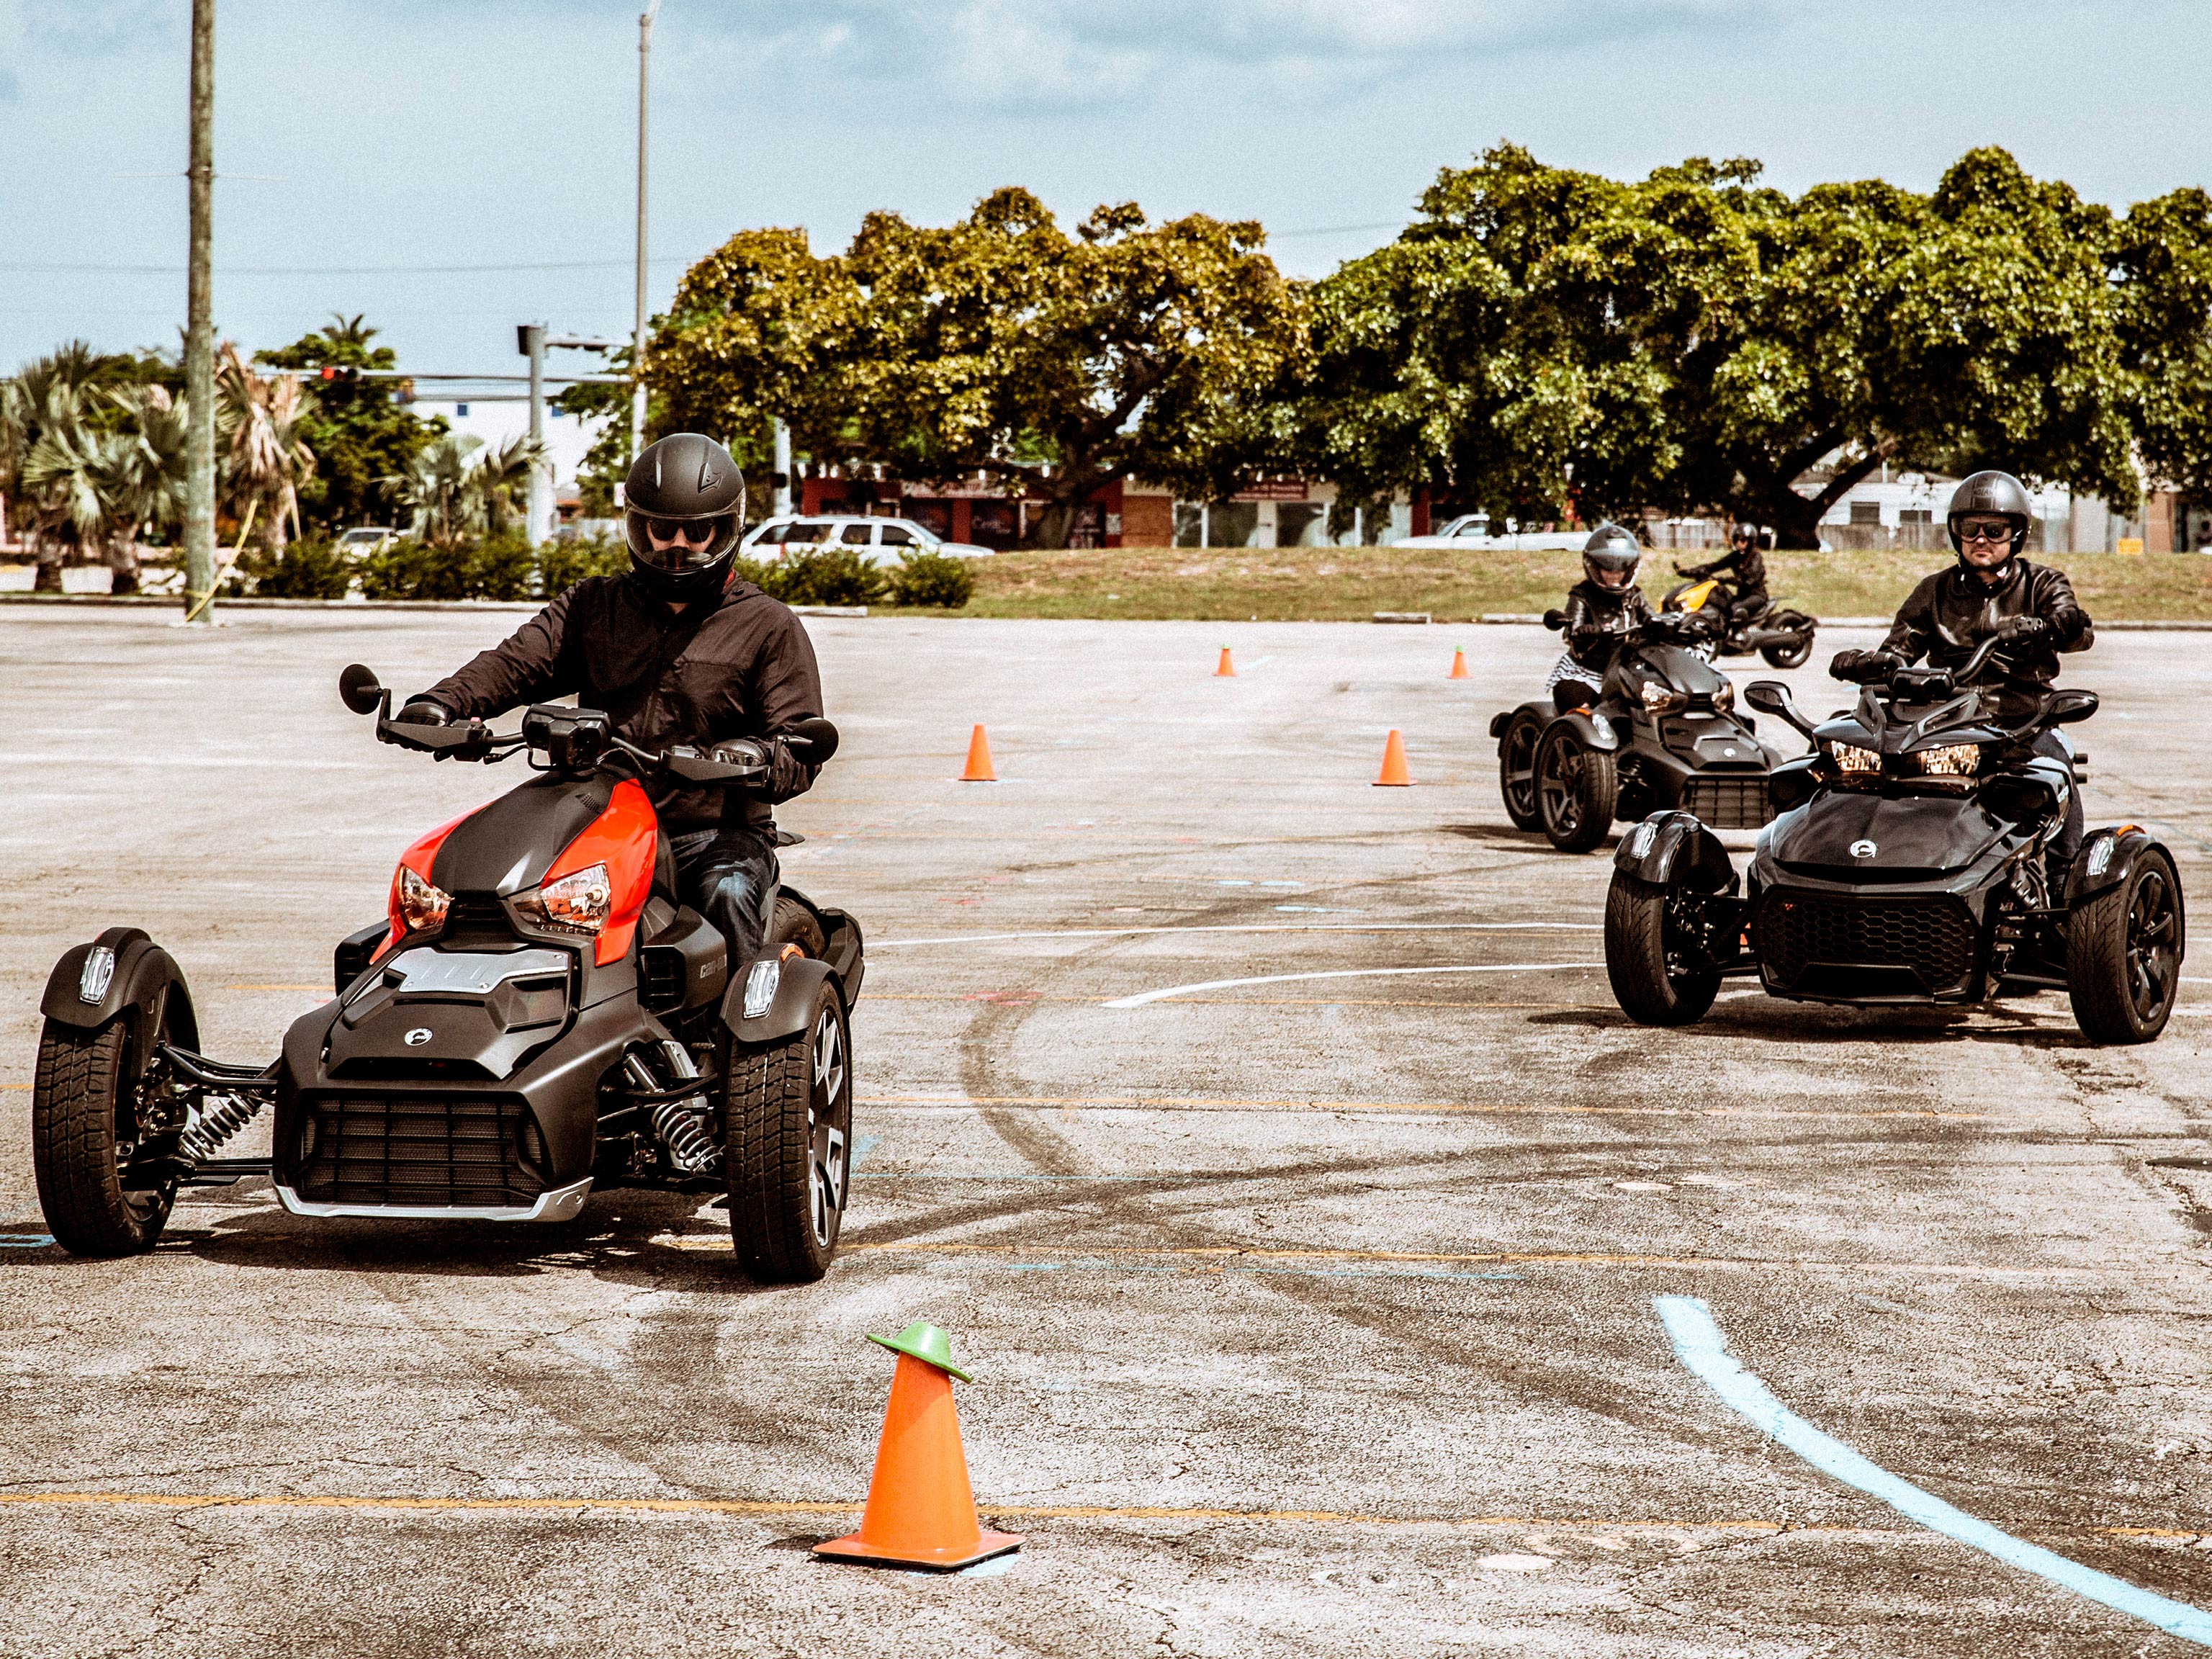 Different riders doing a cone course with Can-Am 3-wheeled vehicles